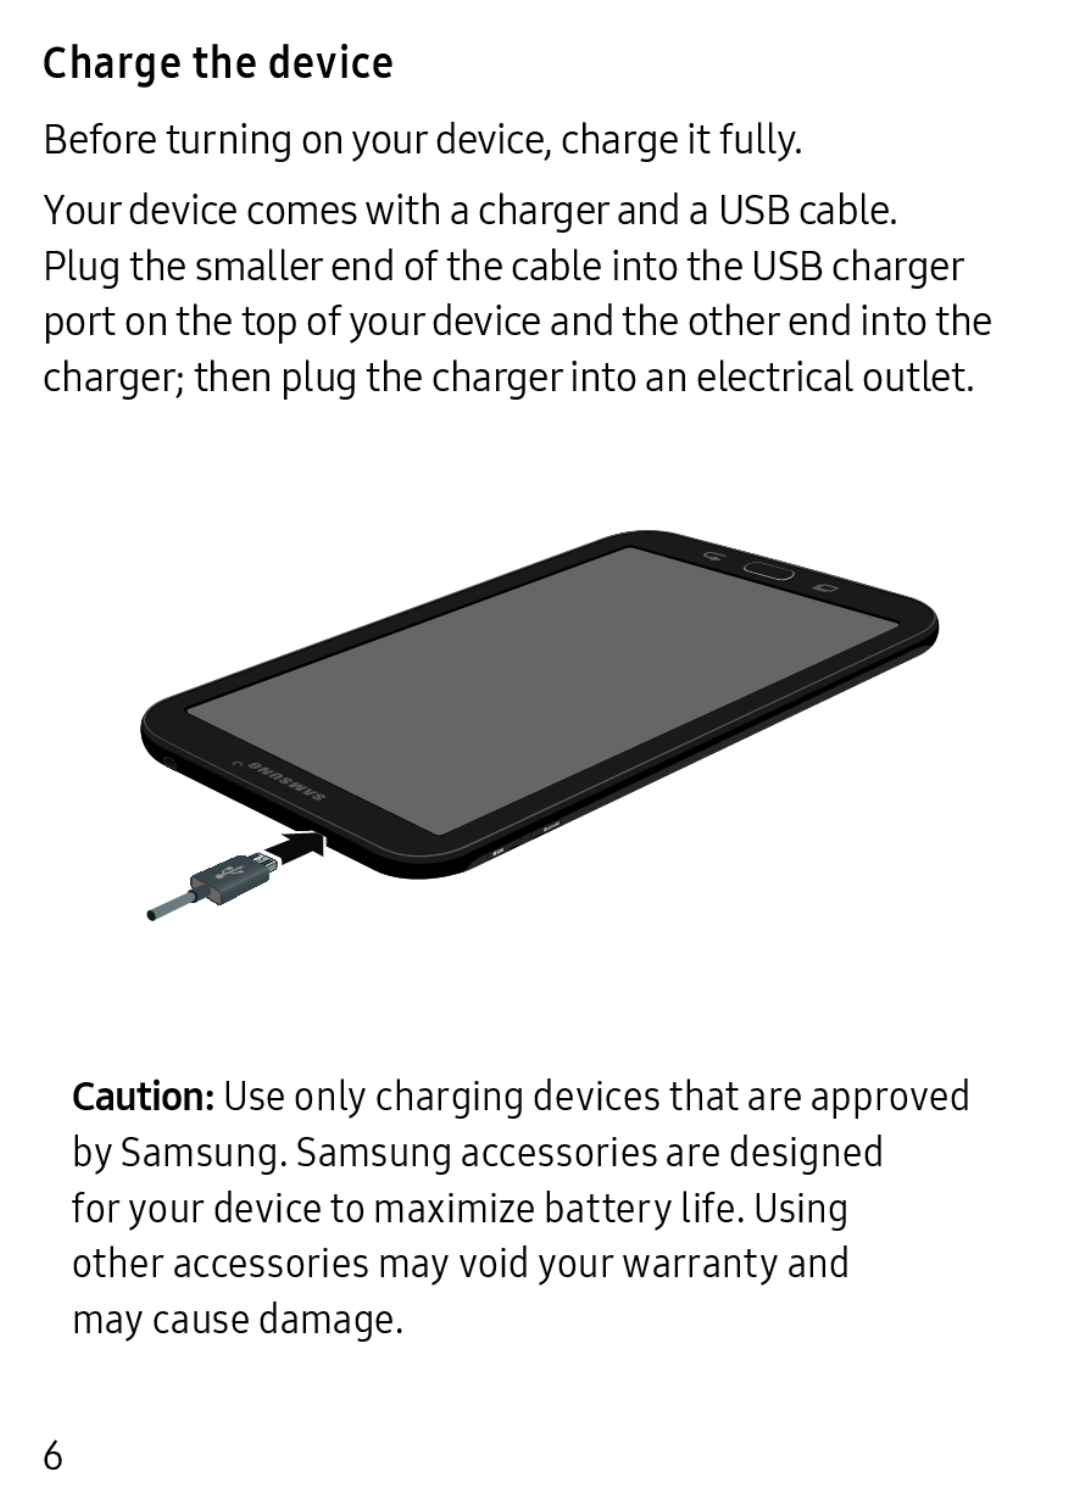 Charge the device Galaxy Tab E 8.0 US Cellular